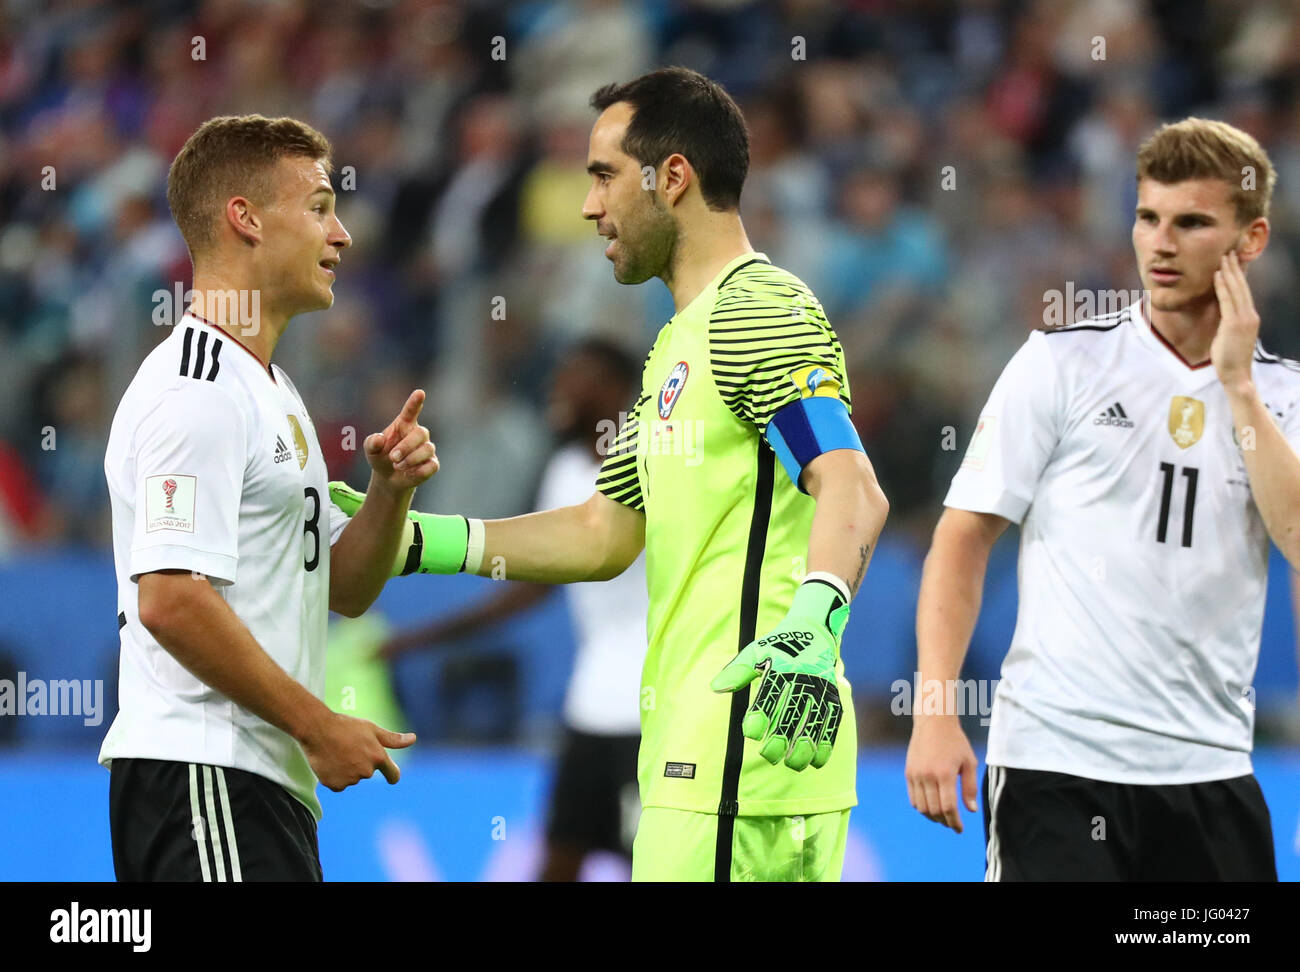 Saint Petersburg, Russia. 2nd July, 2017. Chile's Claudio Bravo (c) and Germany's Joshua Kimmich speak during the Confederations Cup finale between Chile and Germany at the Saint Petersburg Stadium in Saint Petersburg, Russia, 2 July 2017. Photo: Christian Charisius/dpa/Alamy Live News Stock Photo